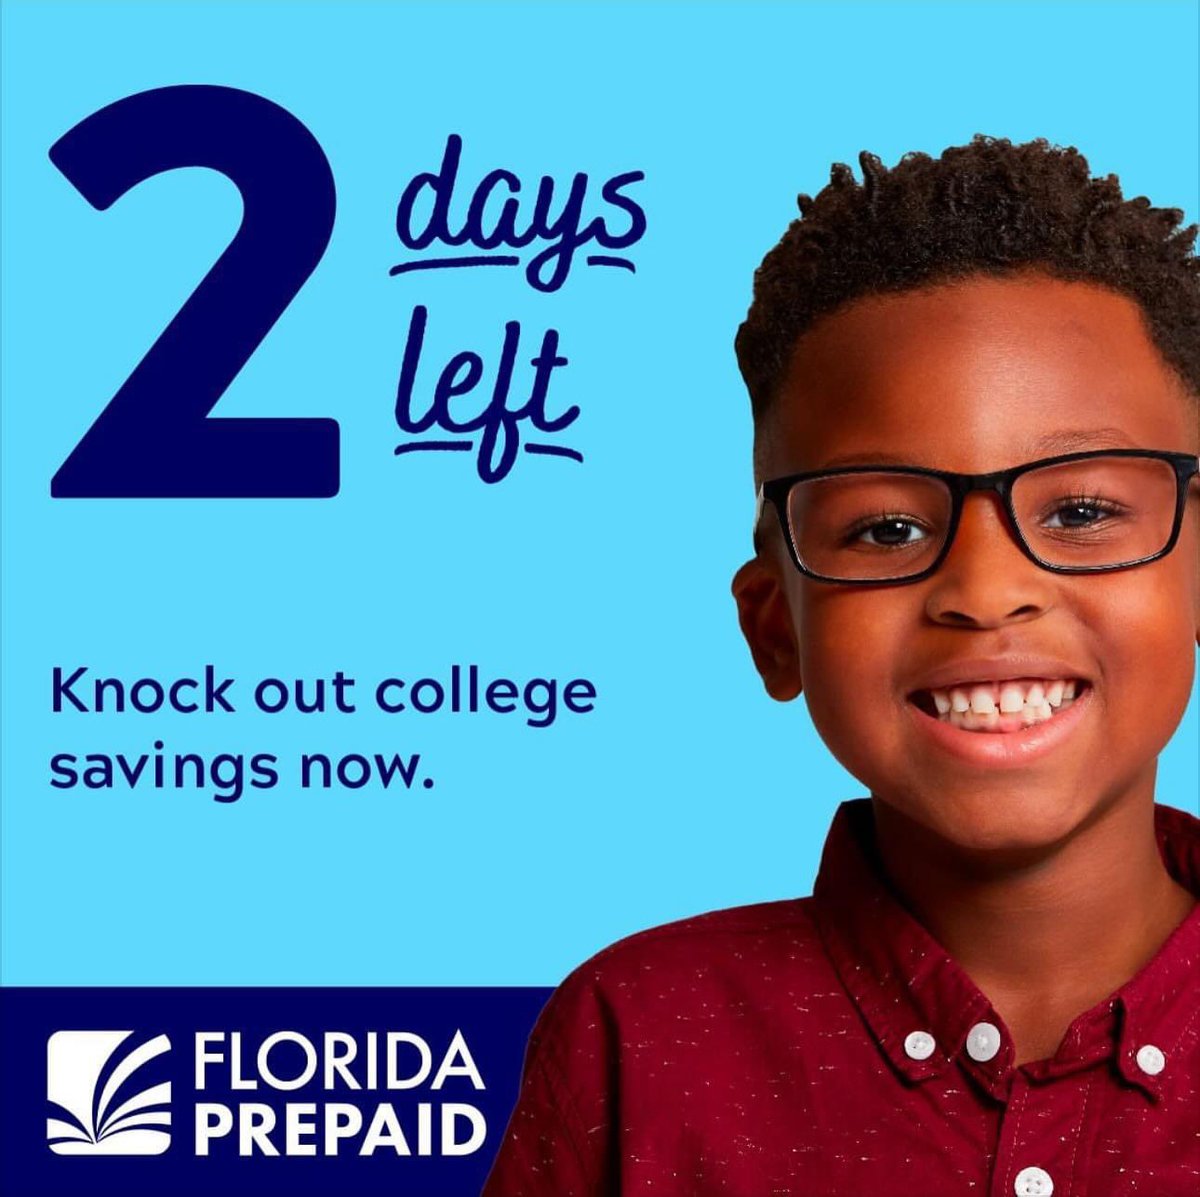 👉There’s only 2 days left of open enrollment with Florida Prepaid!   Check “College Savings” off your To Do List today!! #floridaprepaid #savings #future #education
@FloridaPrepaid